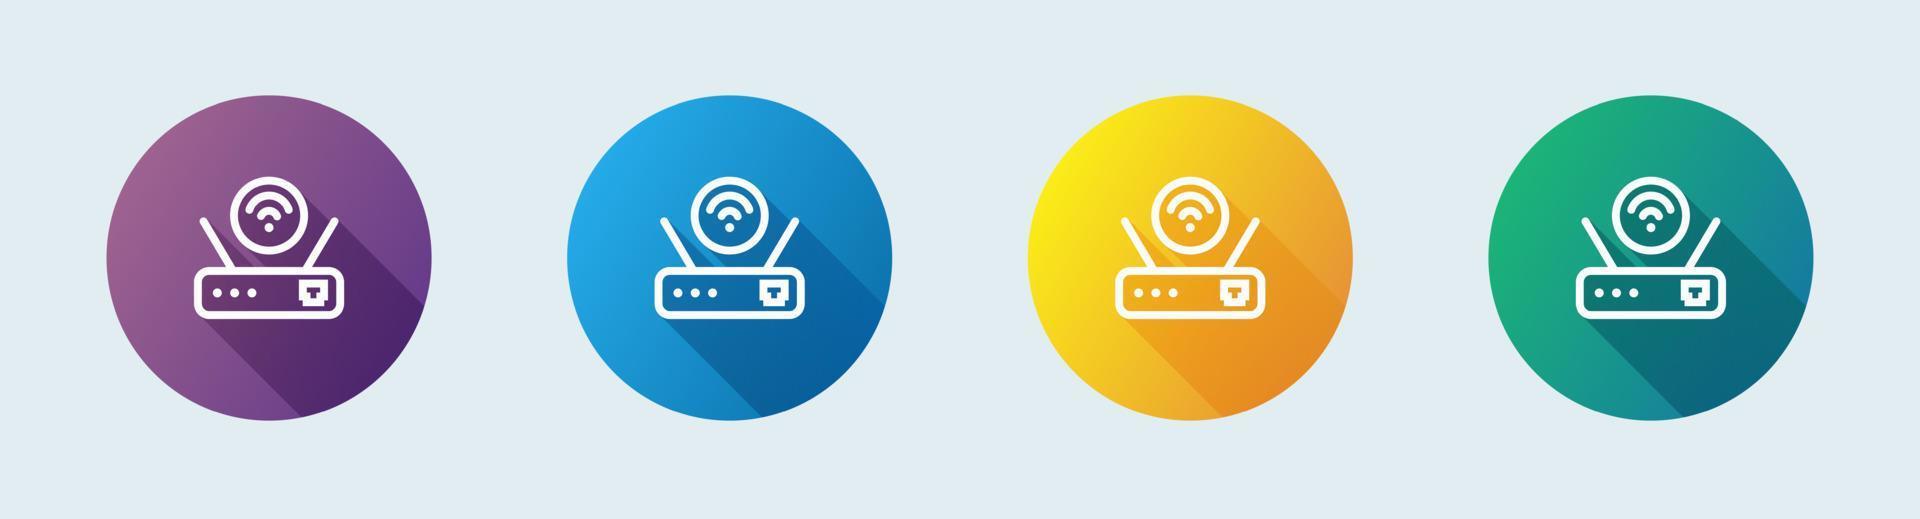 Router line icon in flat design style. Network connection signs vector illustration.